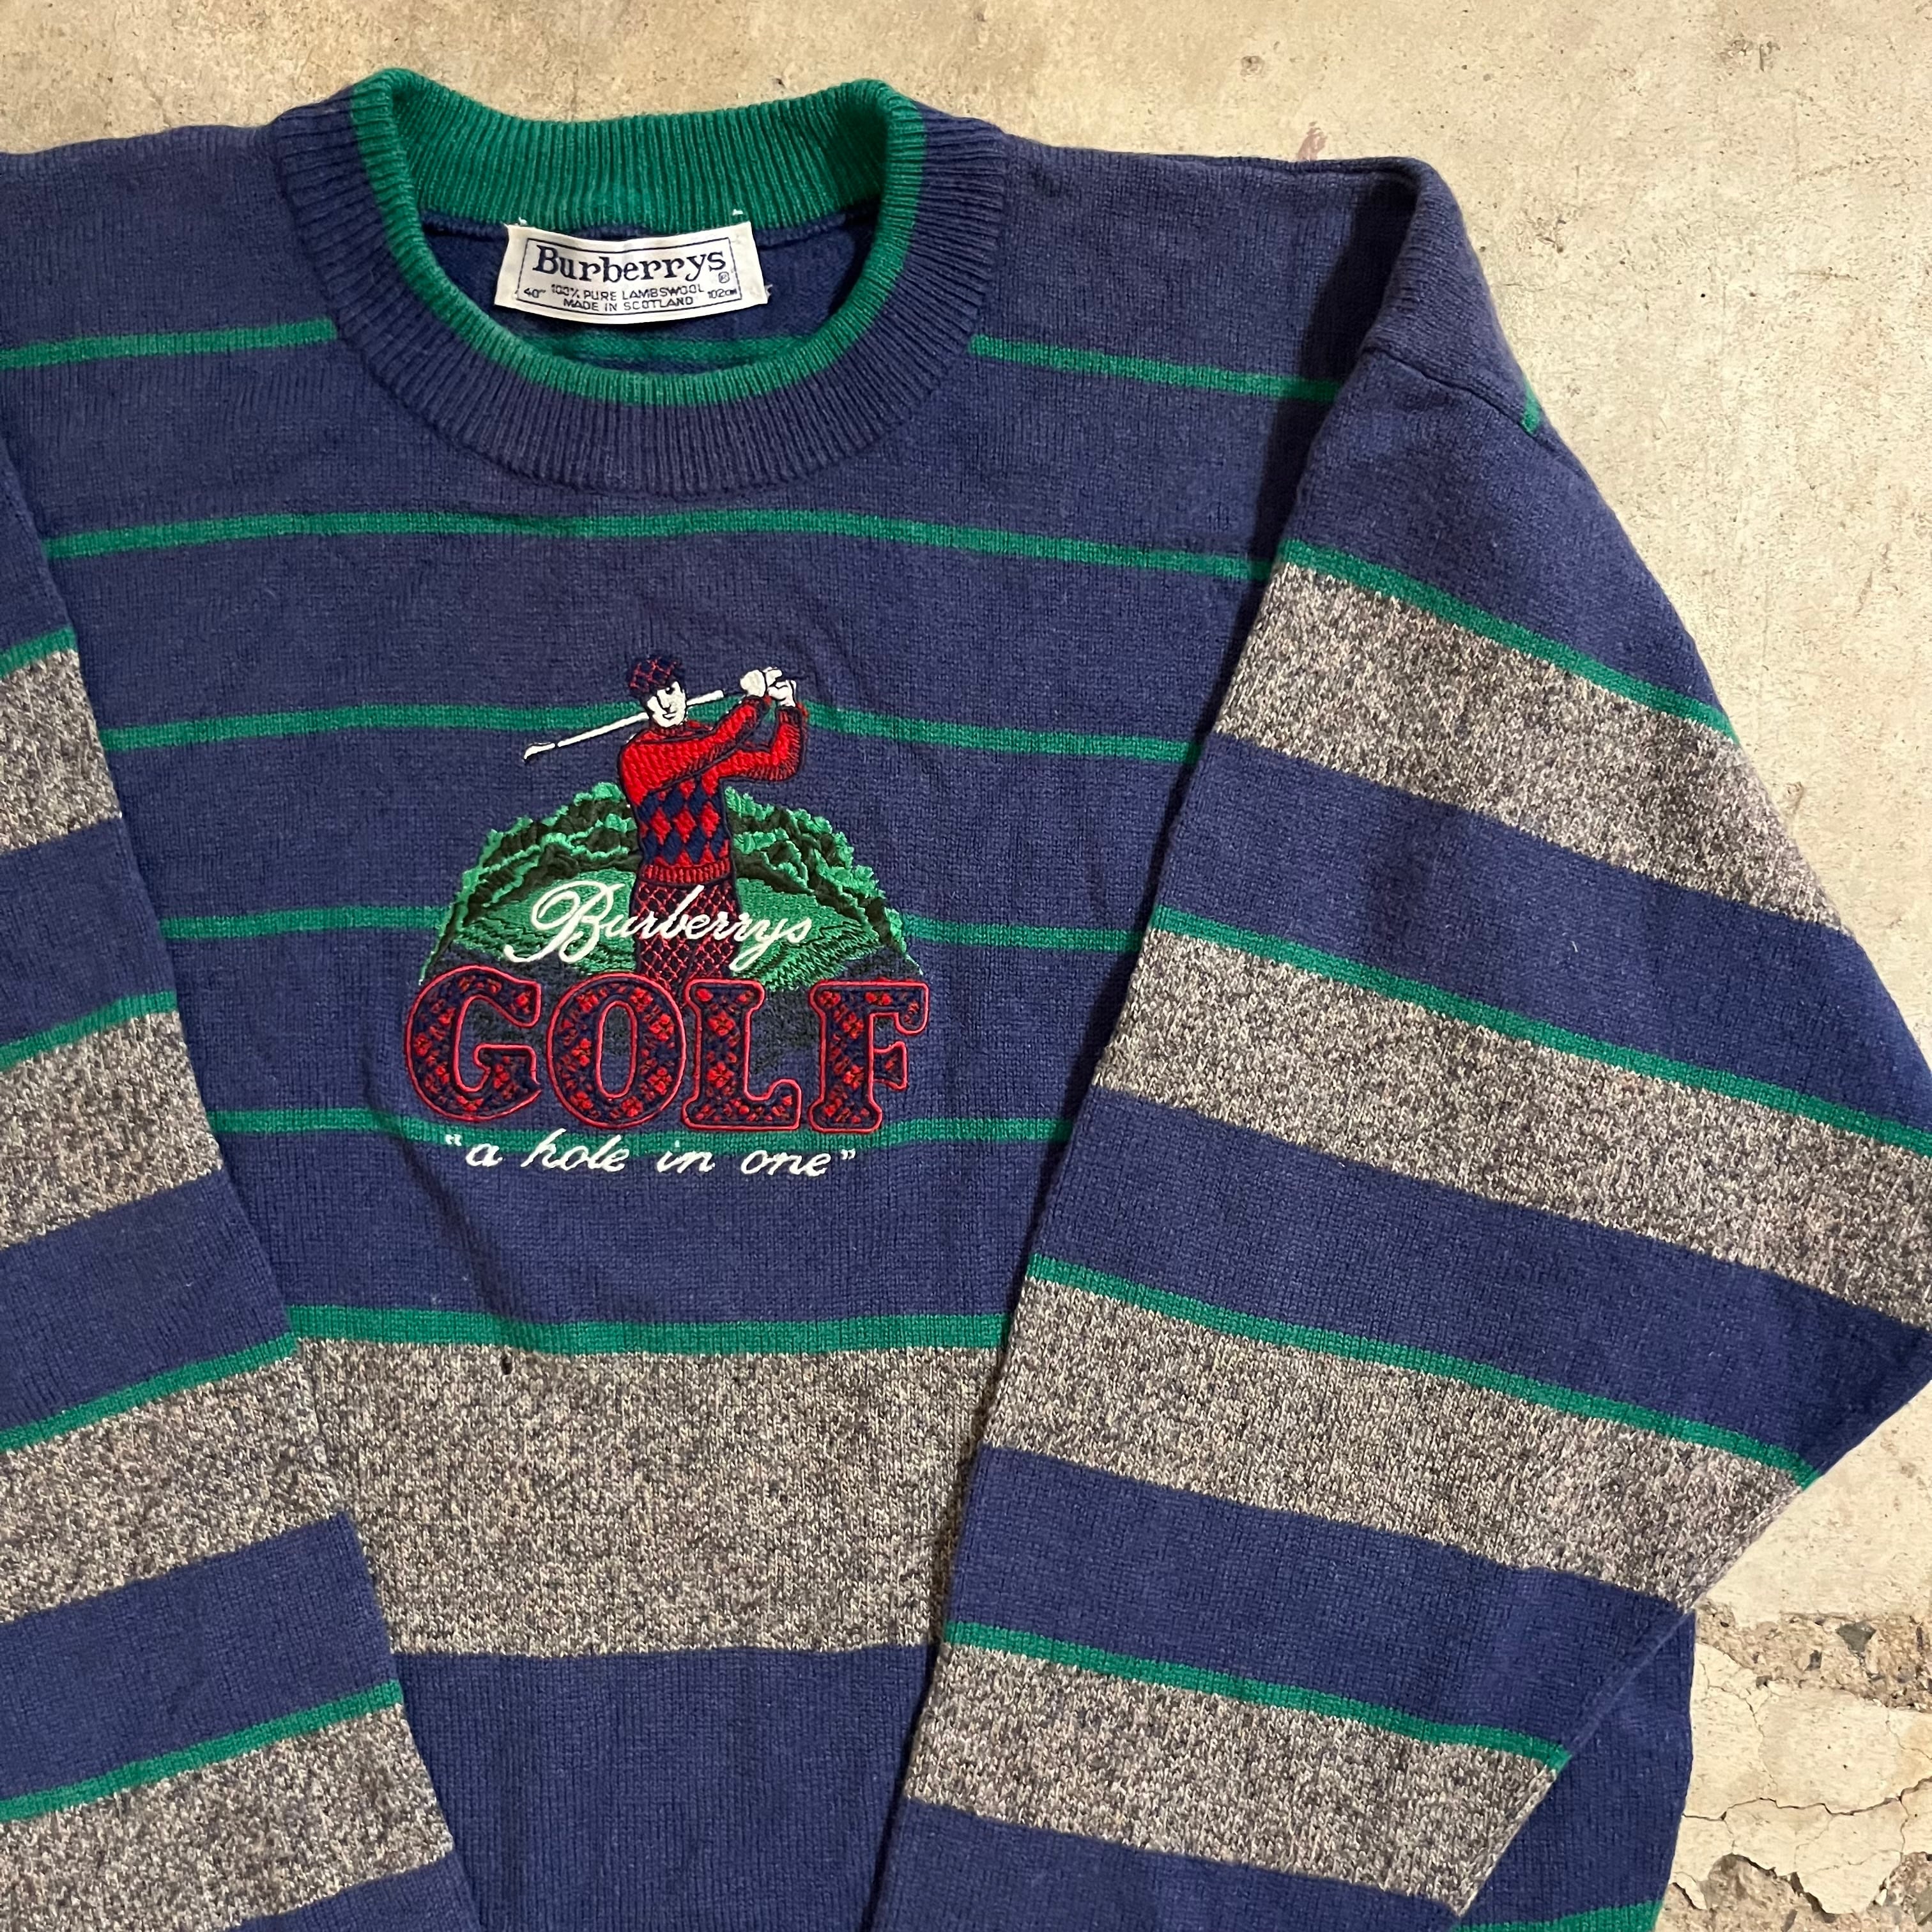 BURBERRY】90's made in Scotland lambwool golf embroidery border